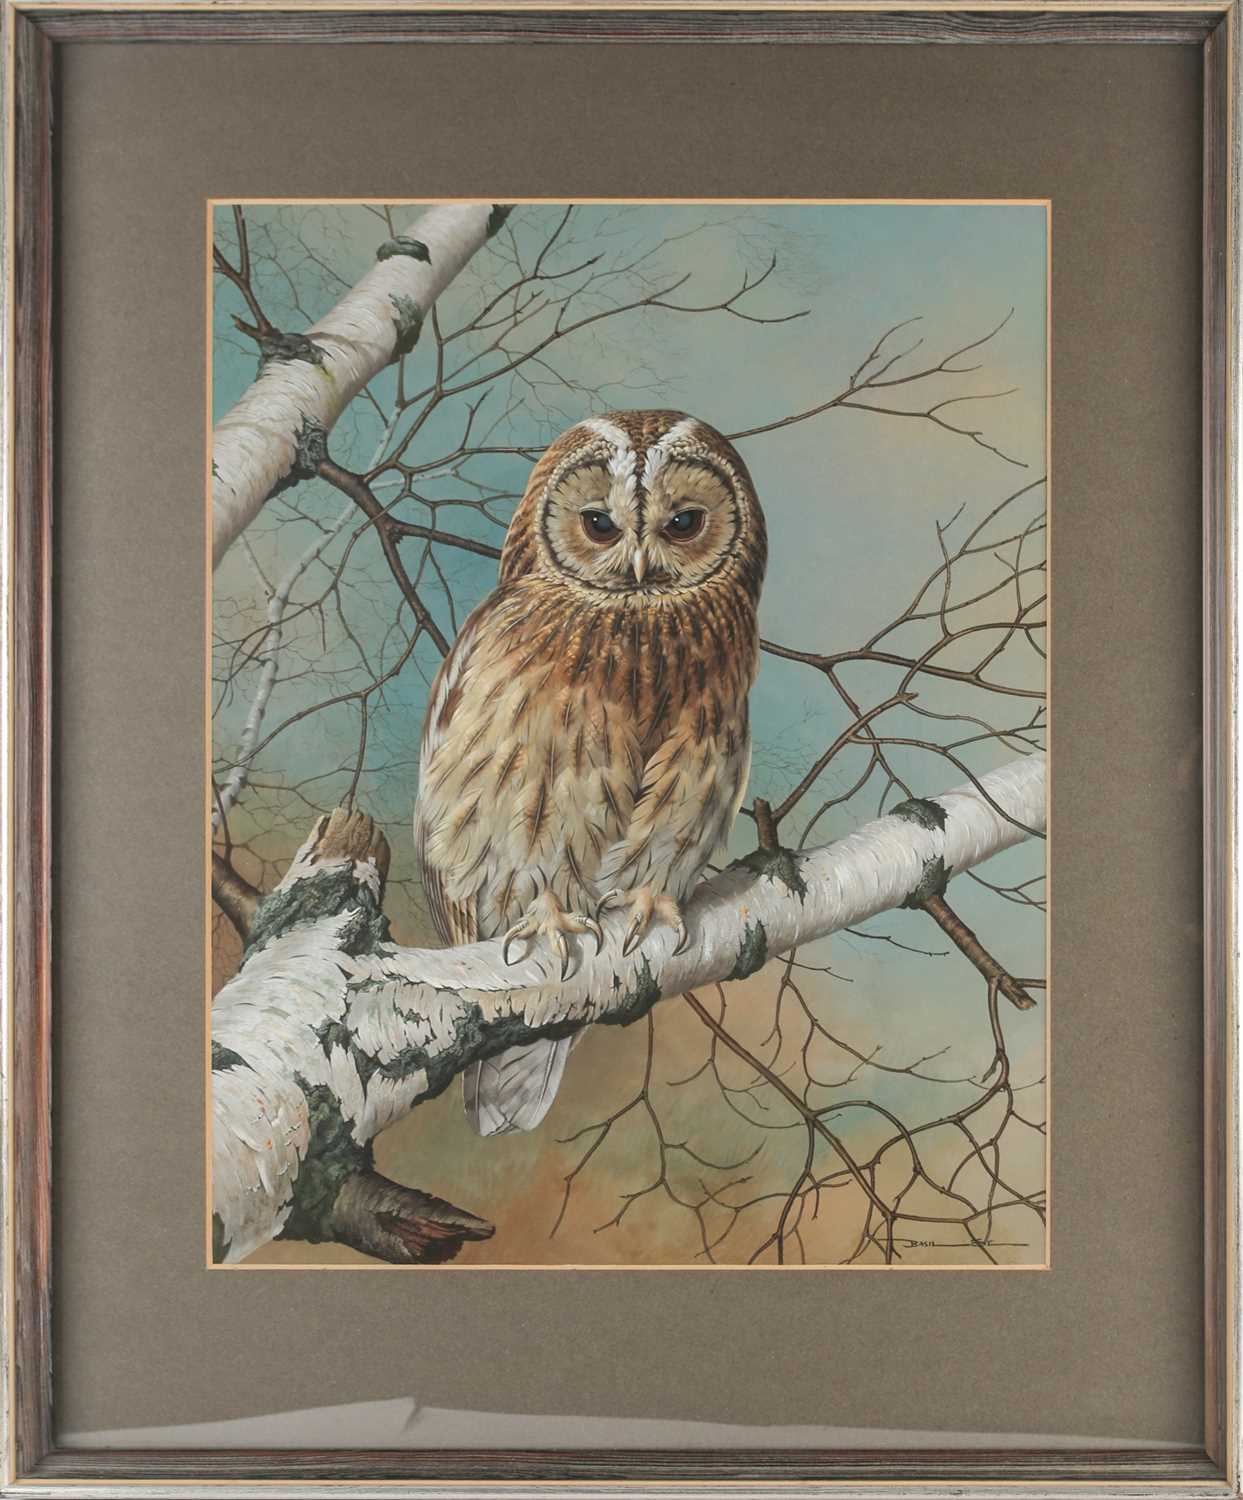 Basil Ede (1931-2016), 'Tawny Owl', gouache and bodycolour, signed to lower right corner, 47.5 cm